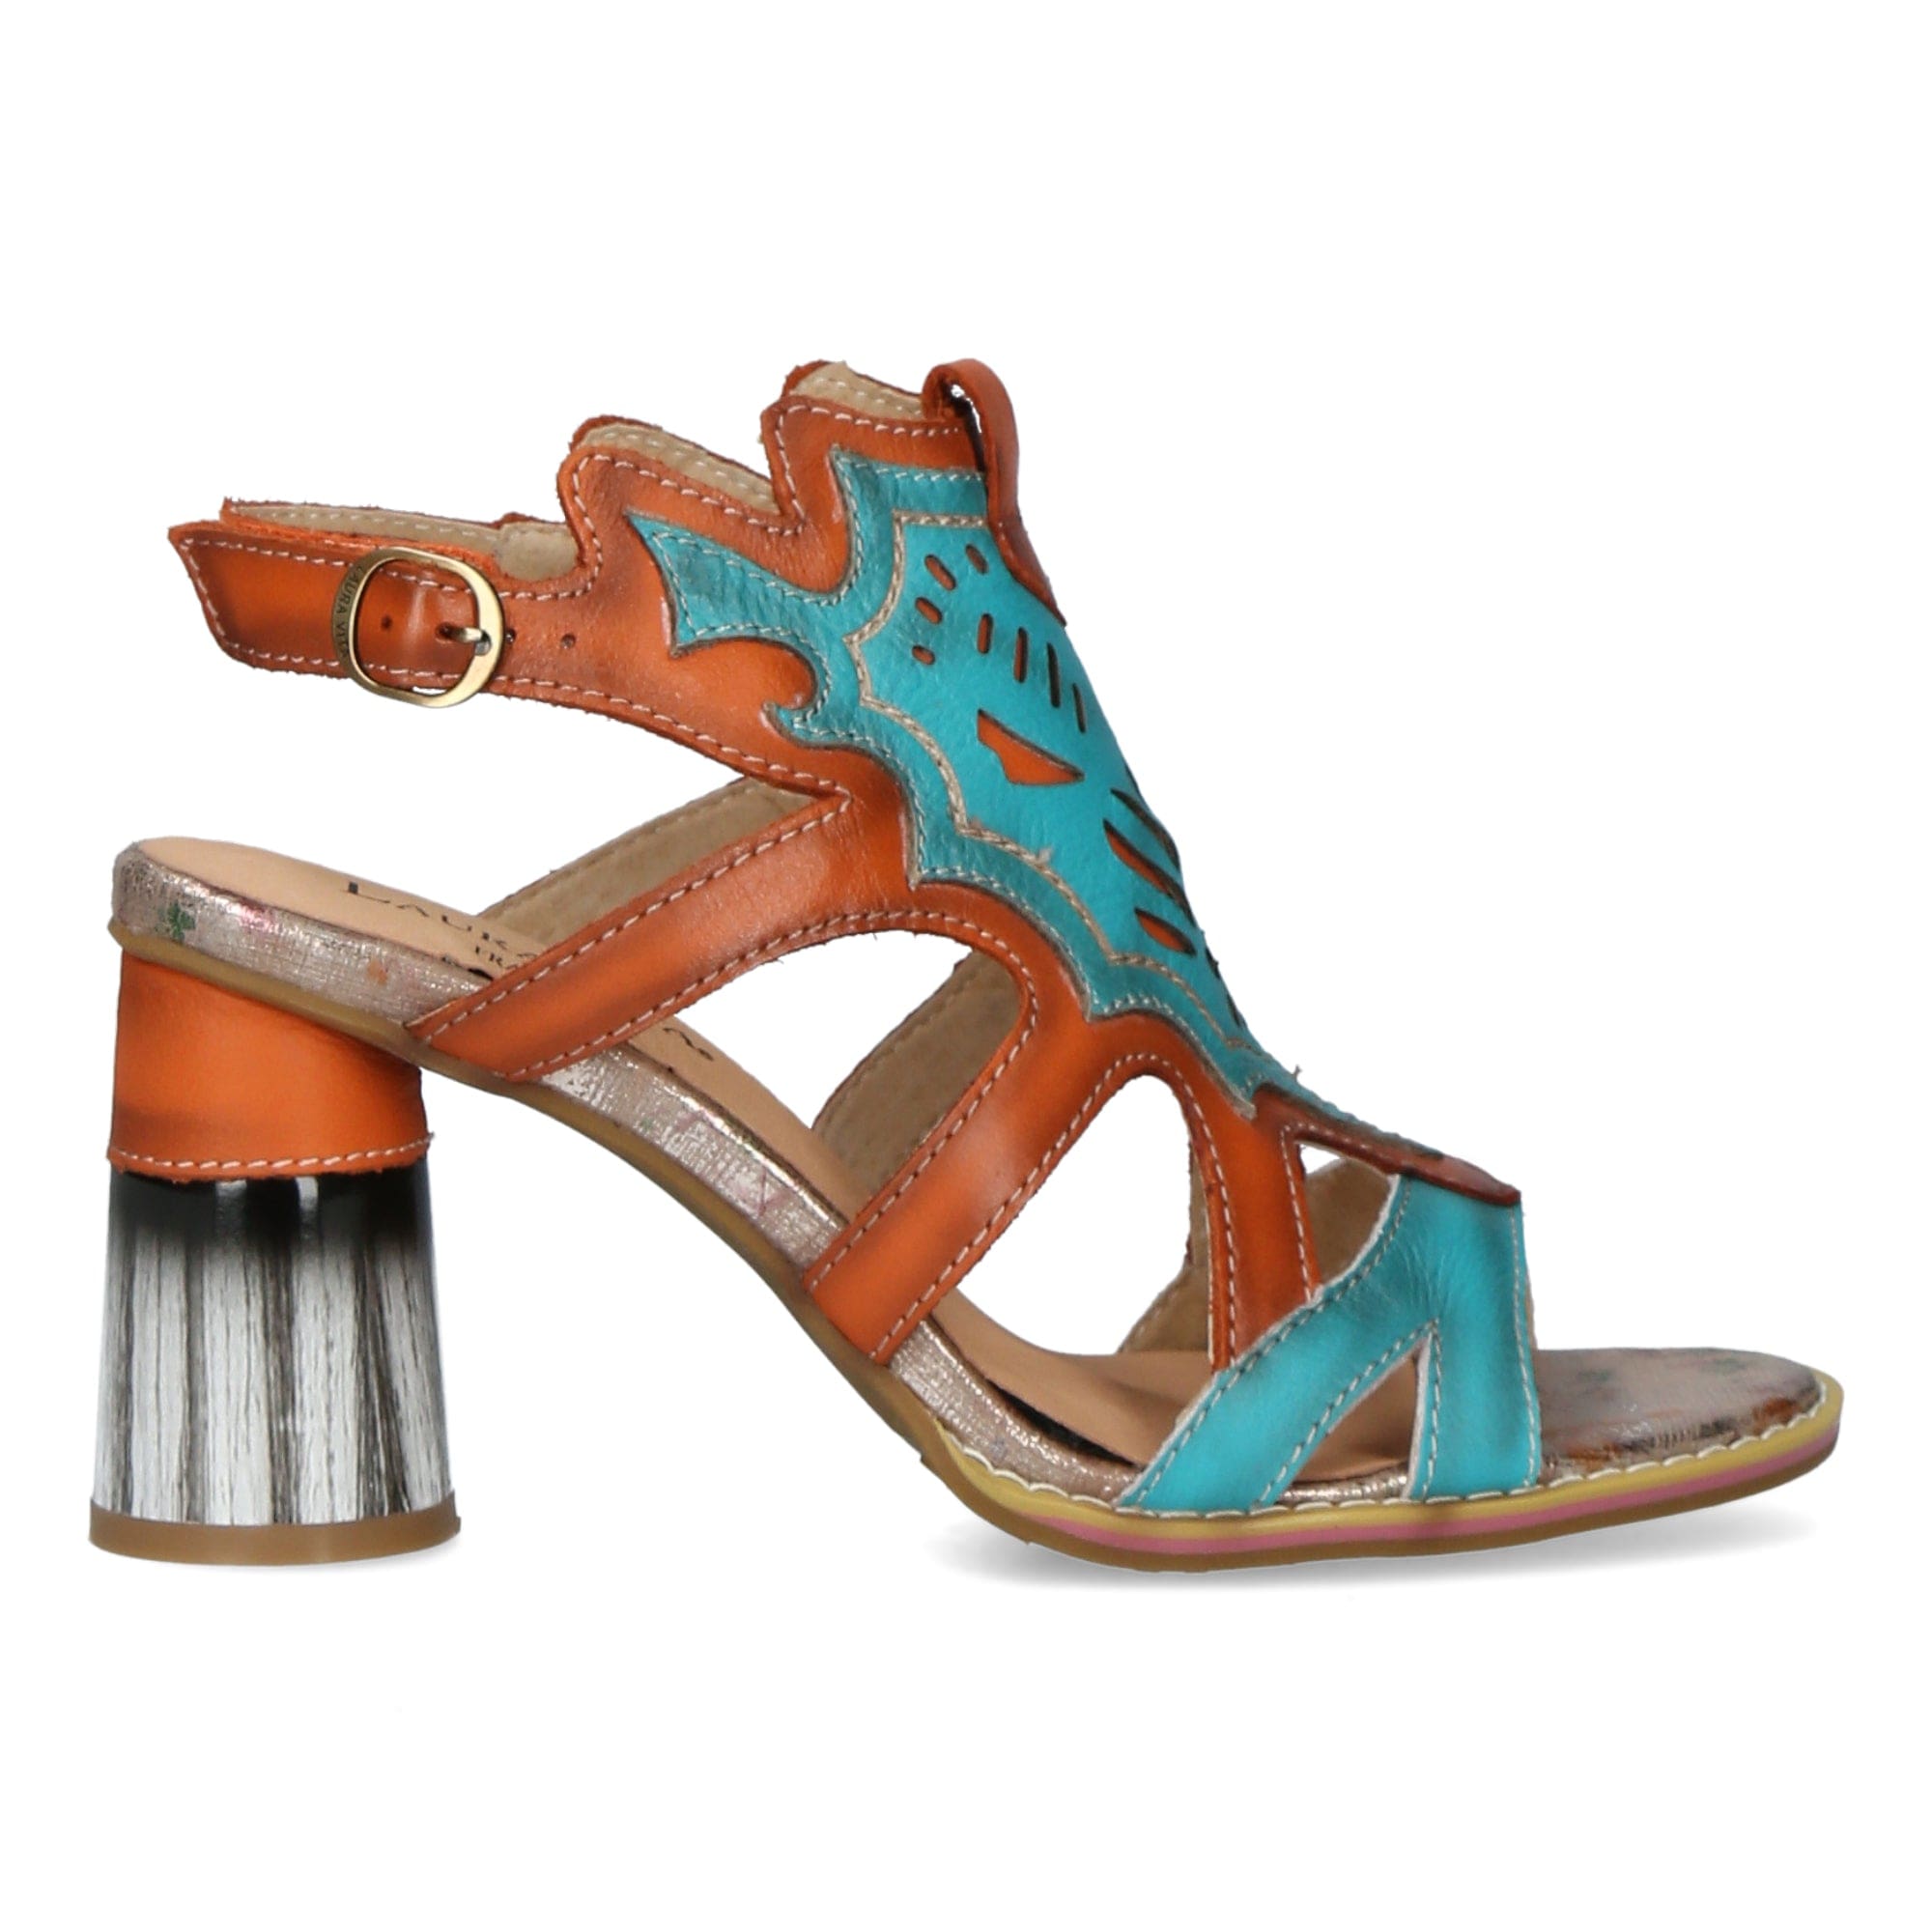 Chaussures GUCSTOO 05 - 35 / TURQUOISE - Sandale